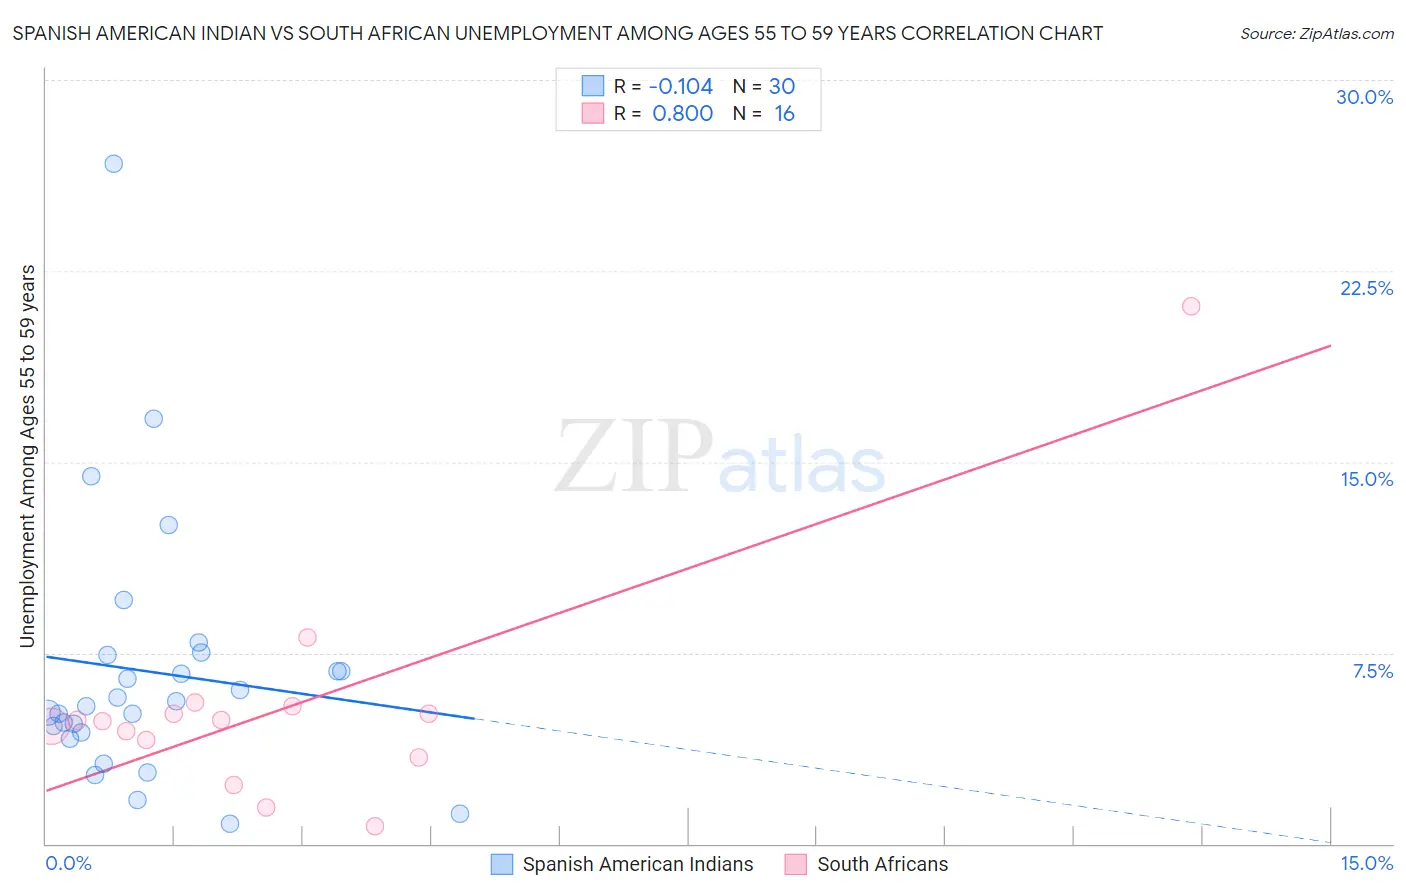 Spanish American Indian vs South African Unemployment Among Ages 55 to 59 years